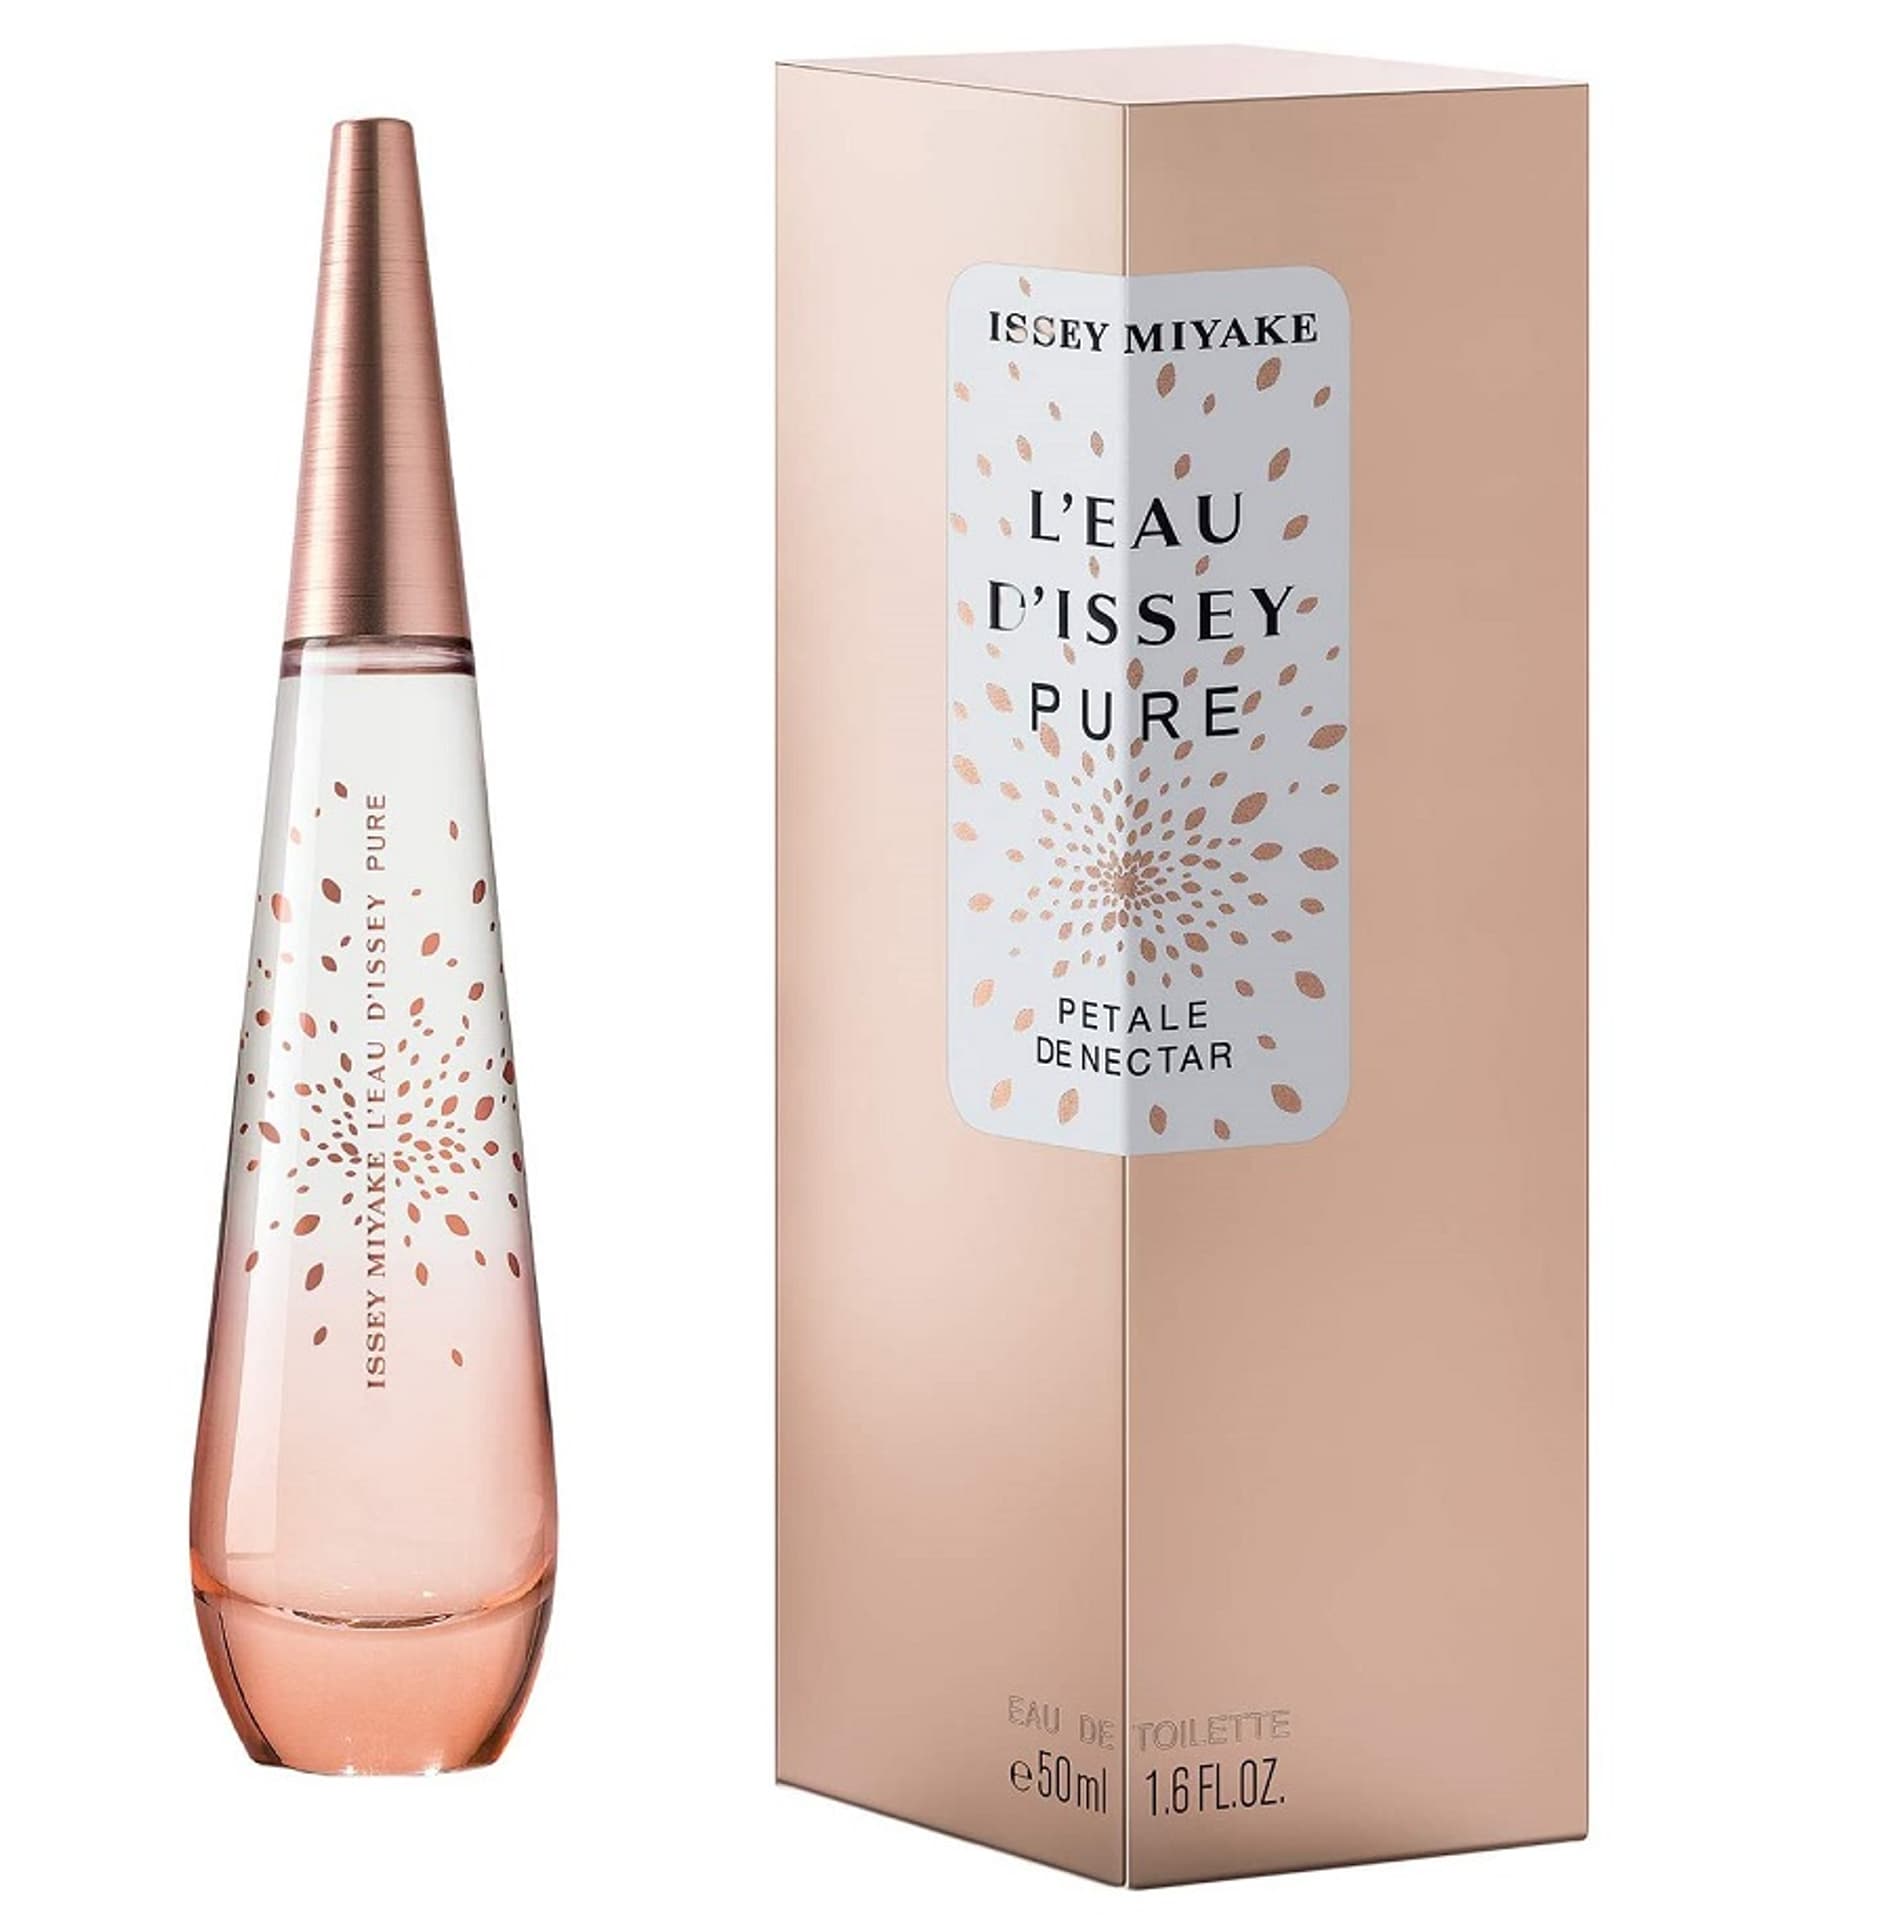 ISSEY MIYAKE L'Eau d'Issey Pure Nectar EDT spray 50ml